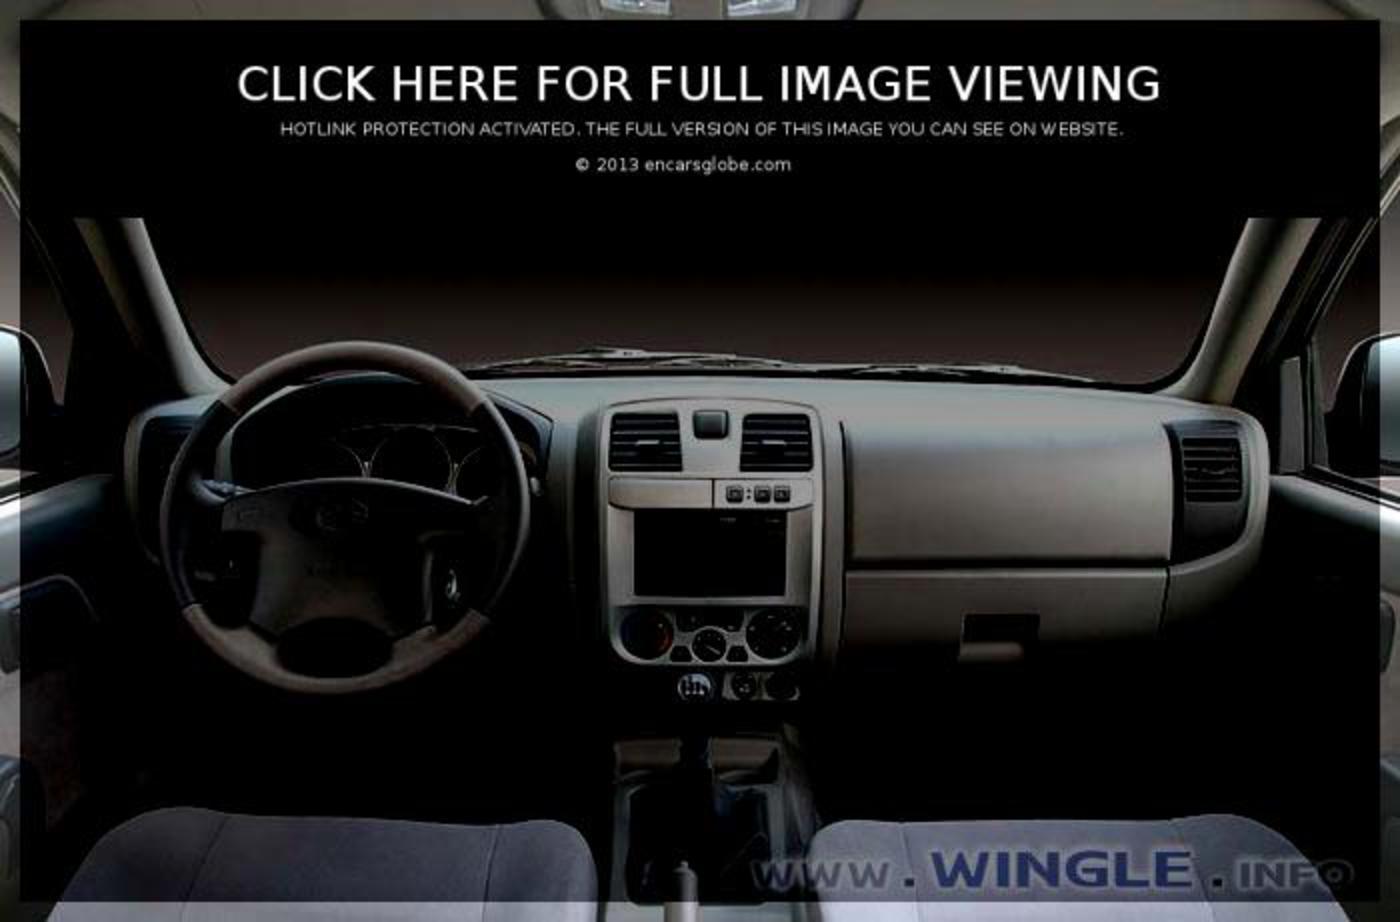 Great Wall Wingle 4x4 Photo Gallery: Photo #01 out of 12, Image ...